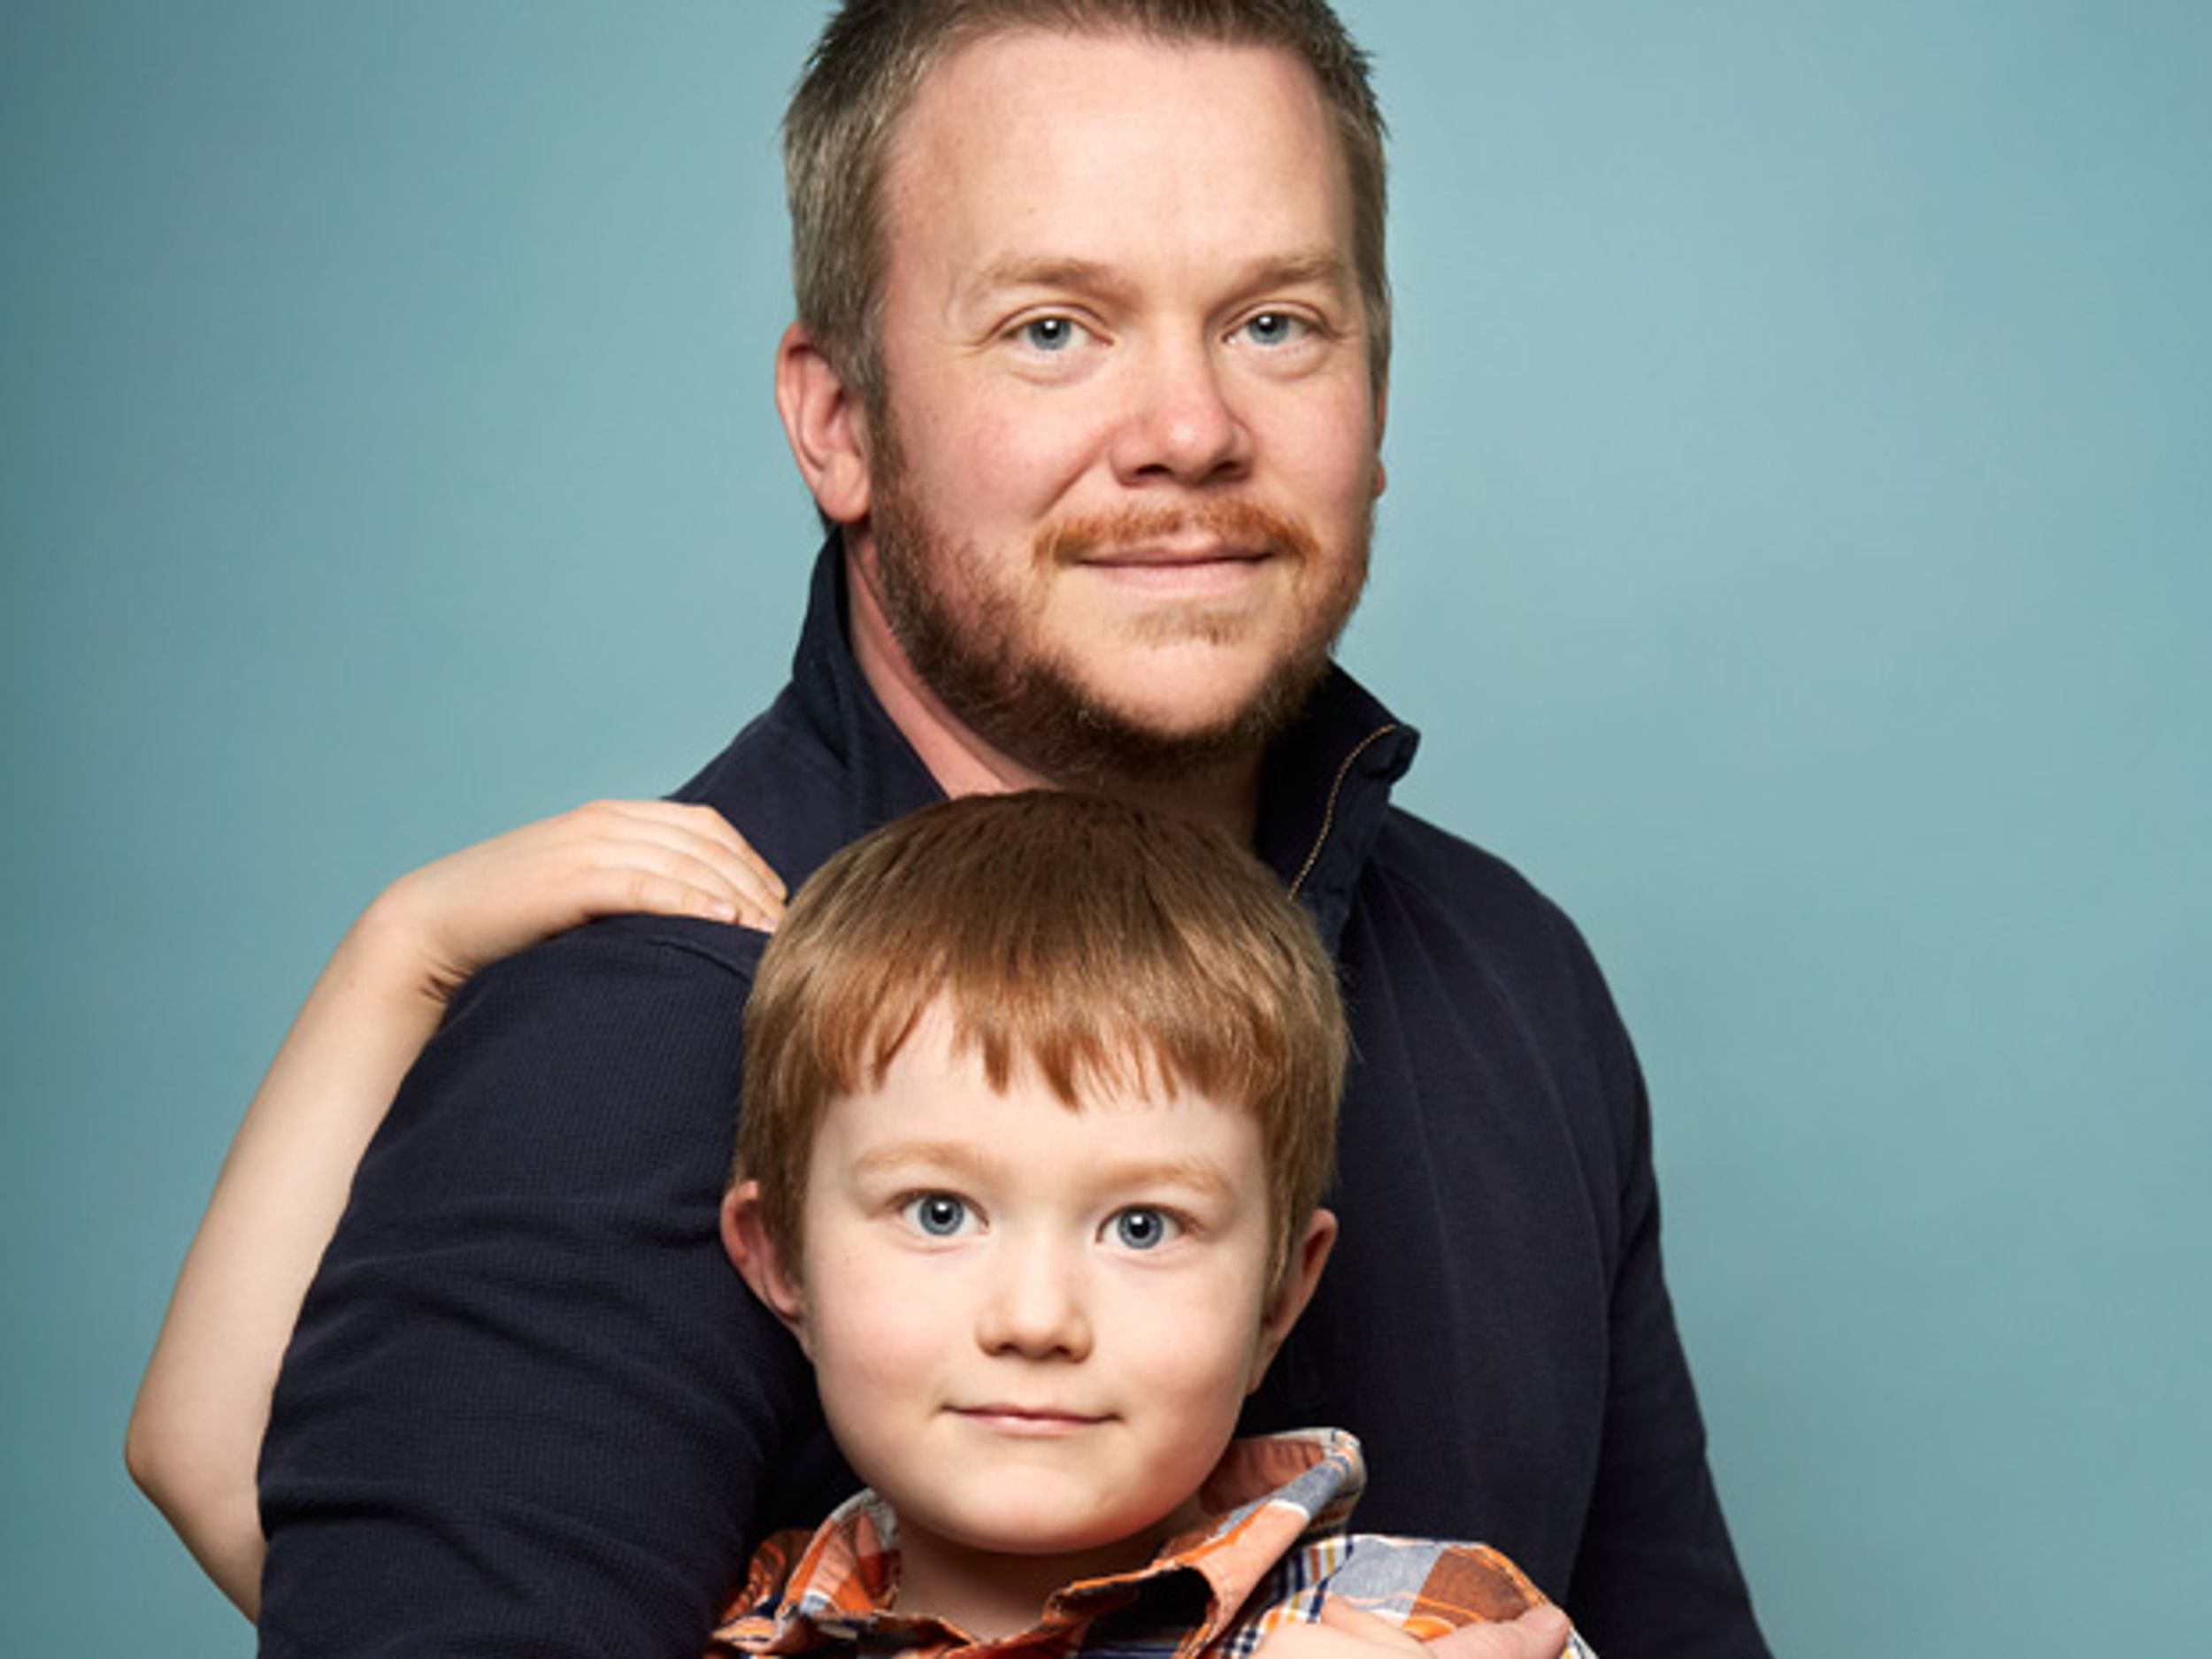 Photo of the author and his son.